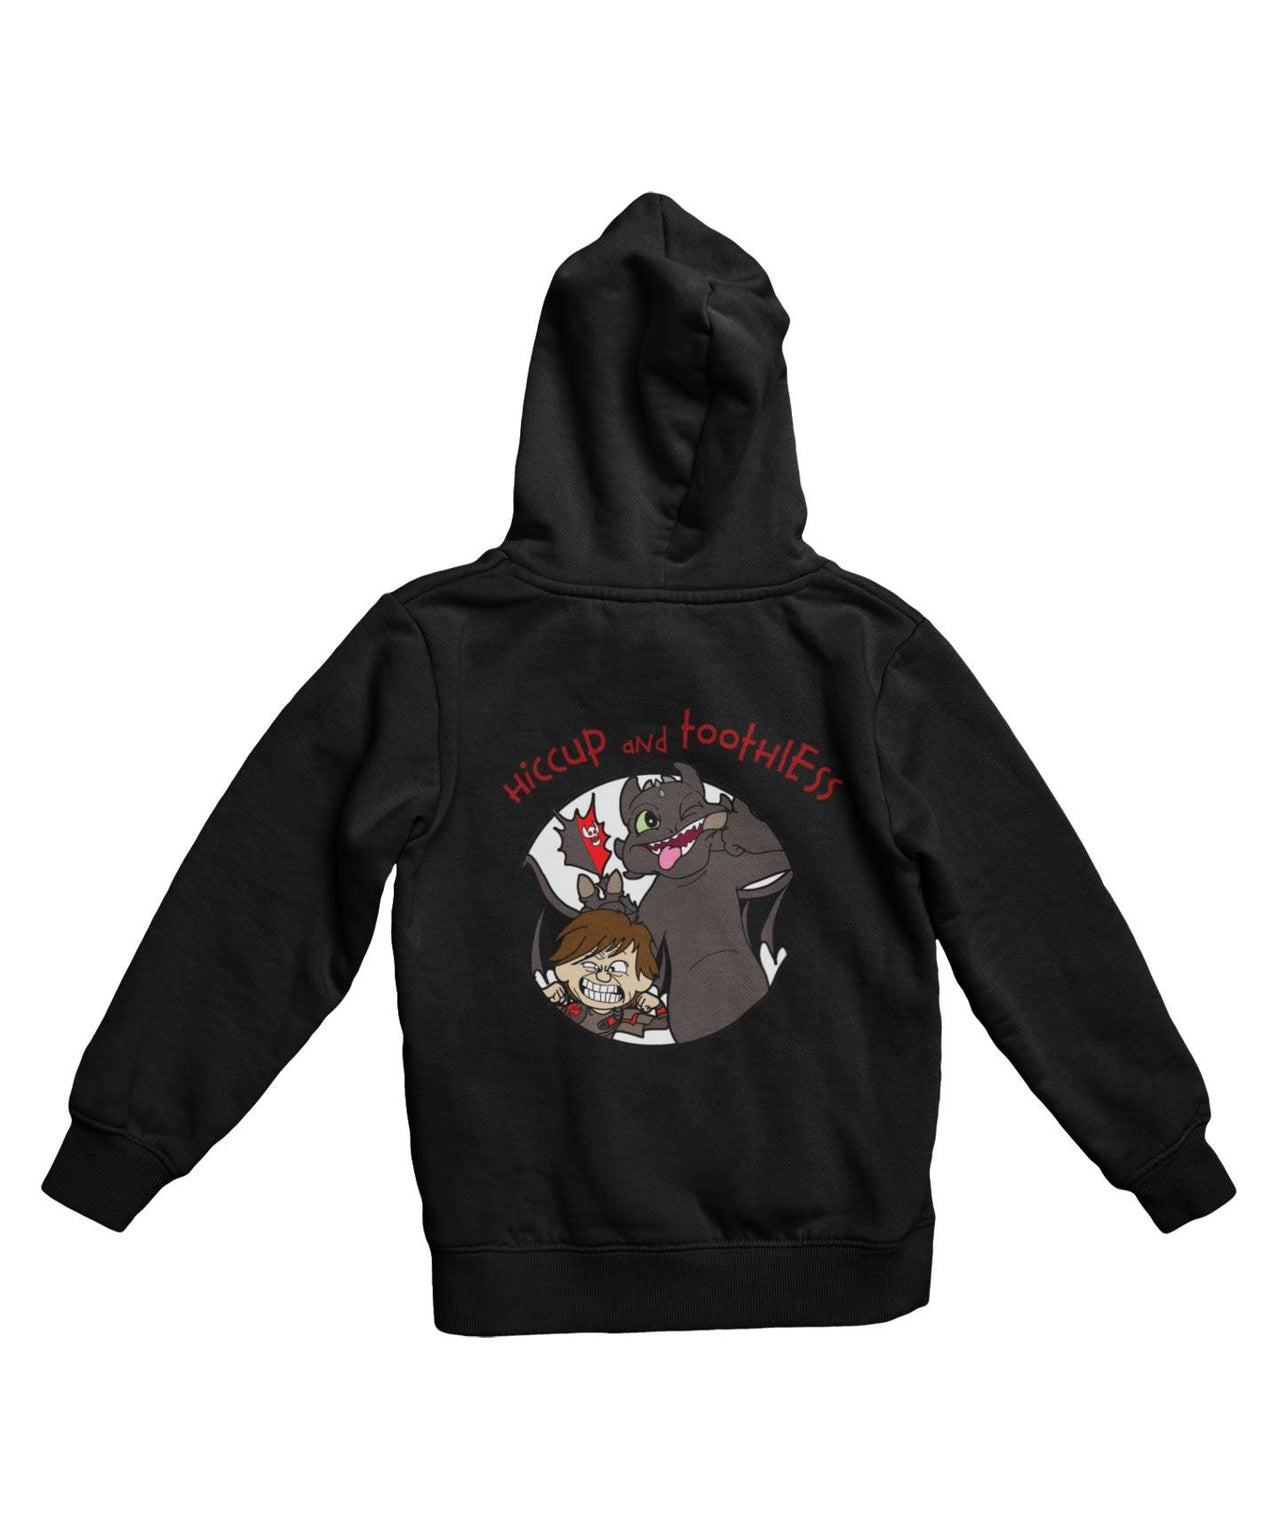 Top Notchy Hiccup and Toothless Back Printed Hoodie For Men and Women 8Ball